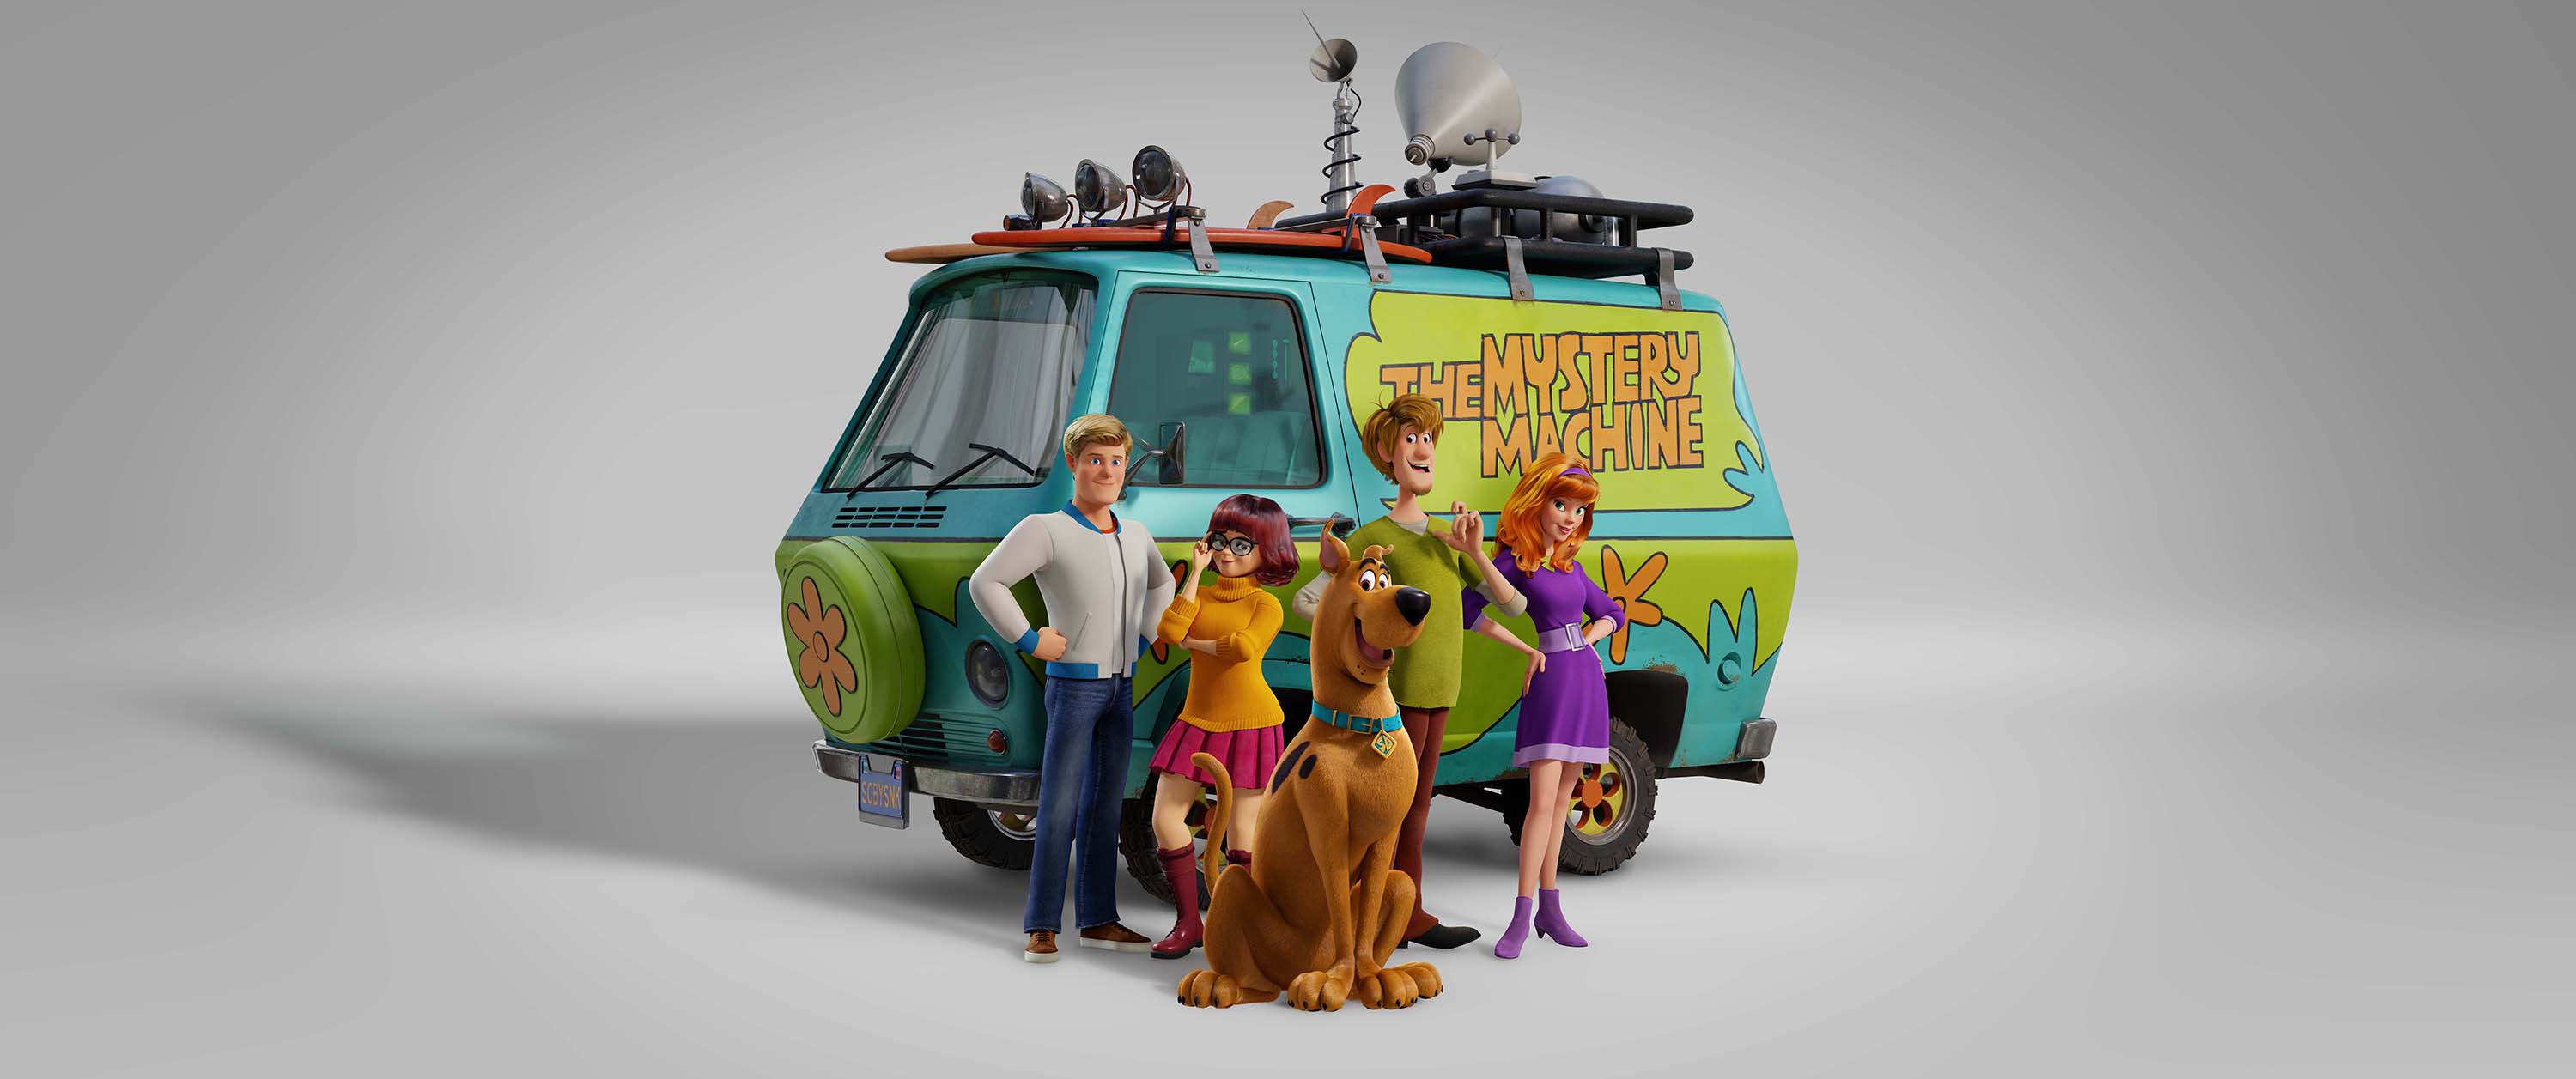 1 - The Reboot of Scooby-Doo in 3D is Coming! - Images, Trailer and Debut Details Revealed